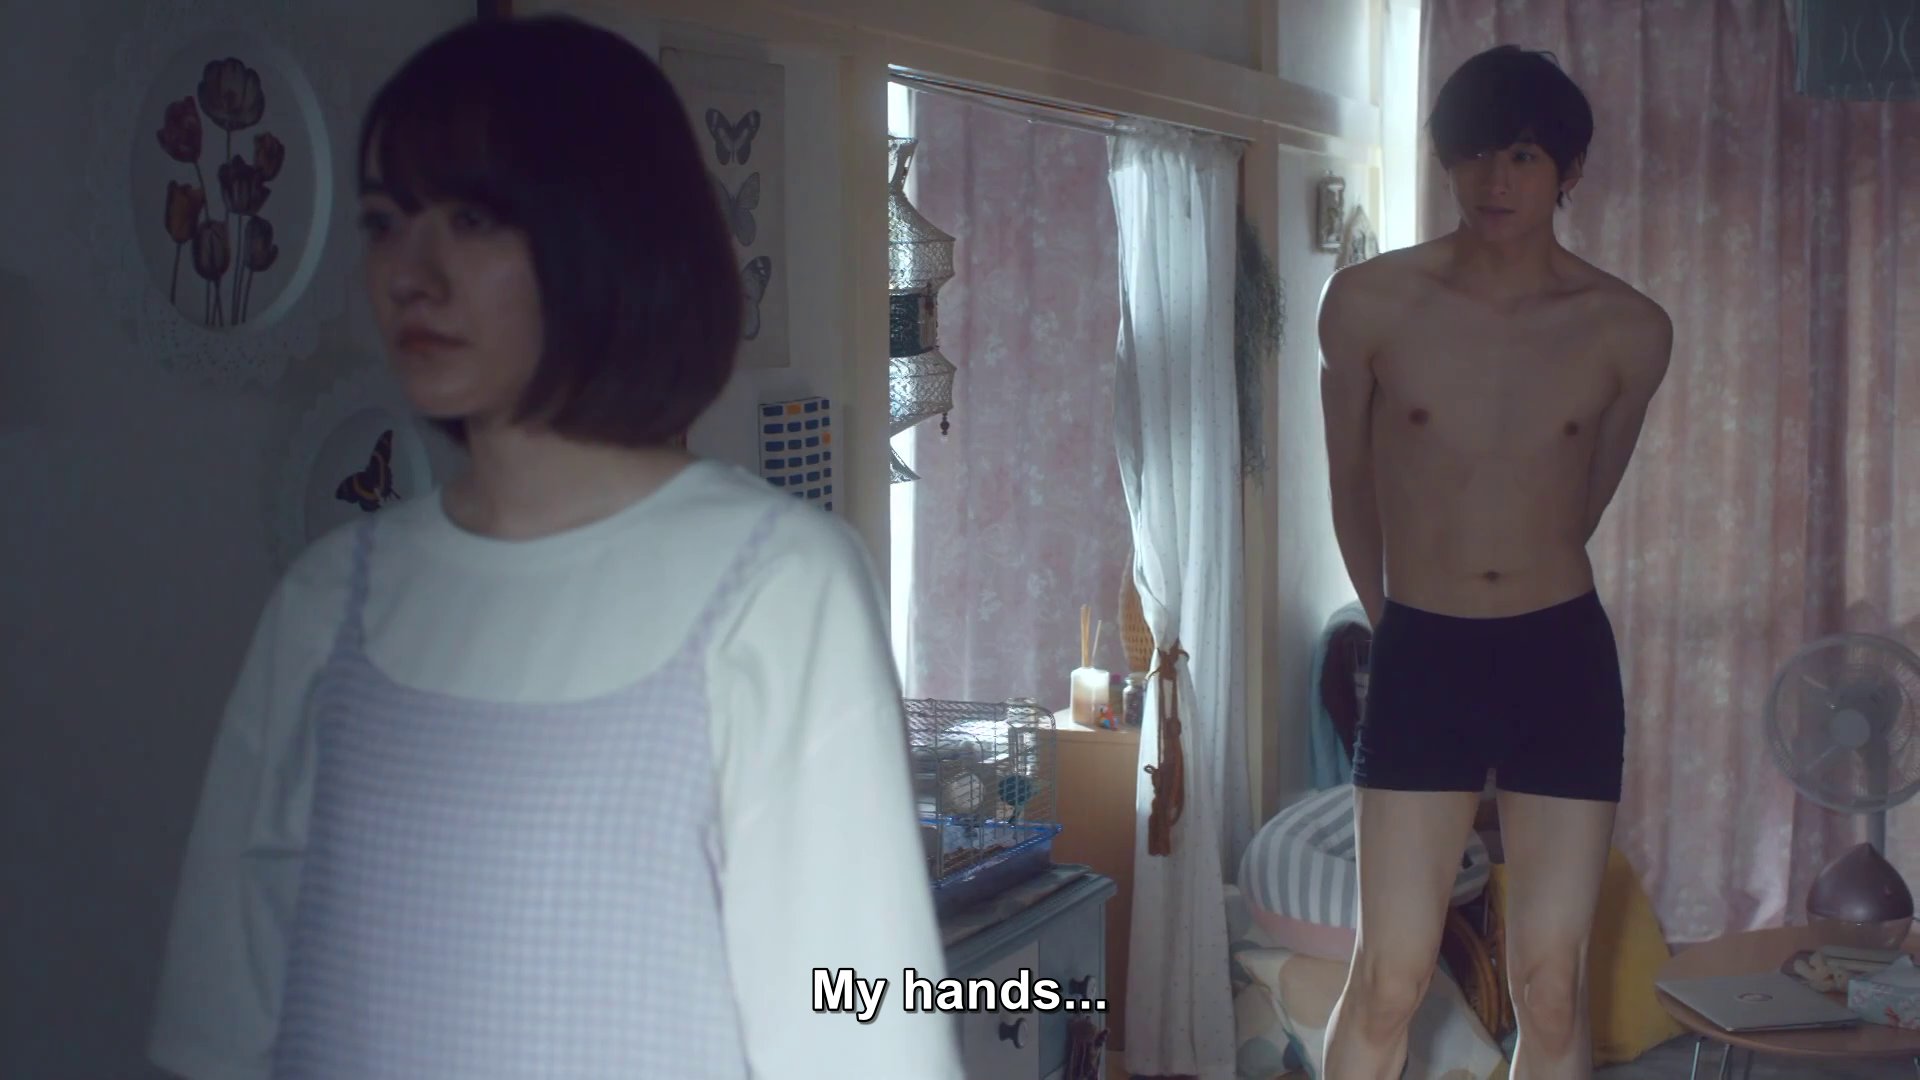 Matsuda, in his underwear, behind Ako, a woman with chin-length dark hair who is fully dressed.  Matsuda: My hands,